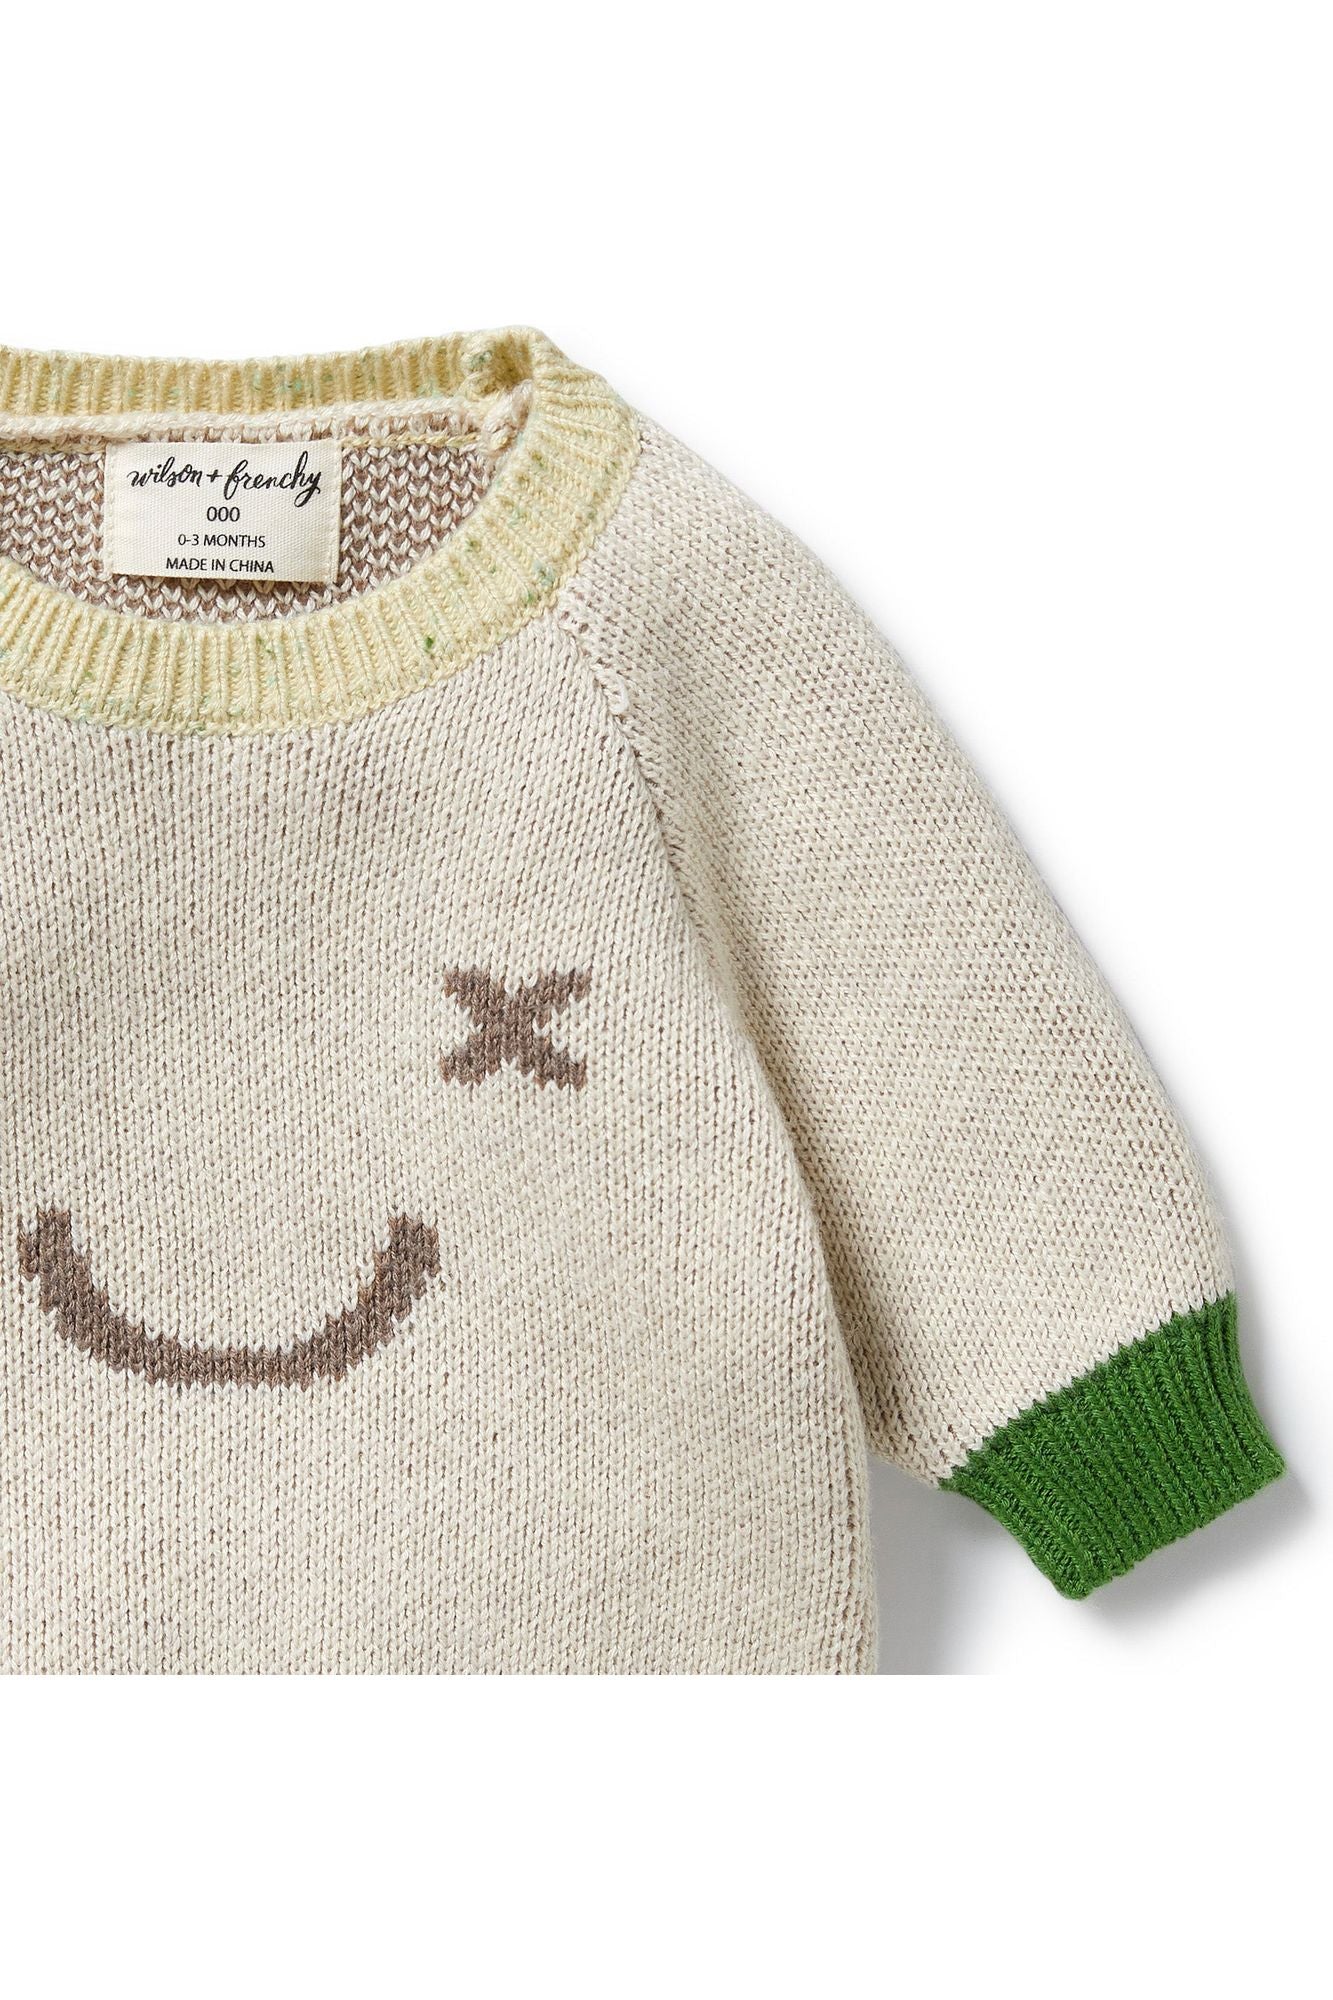 Almond Knitted Jacquard Jumper